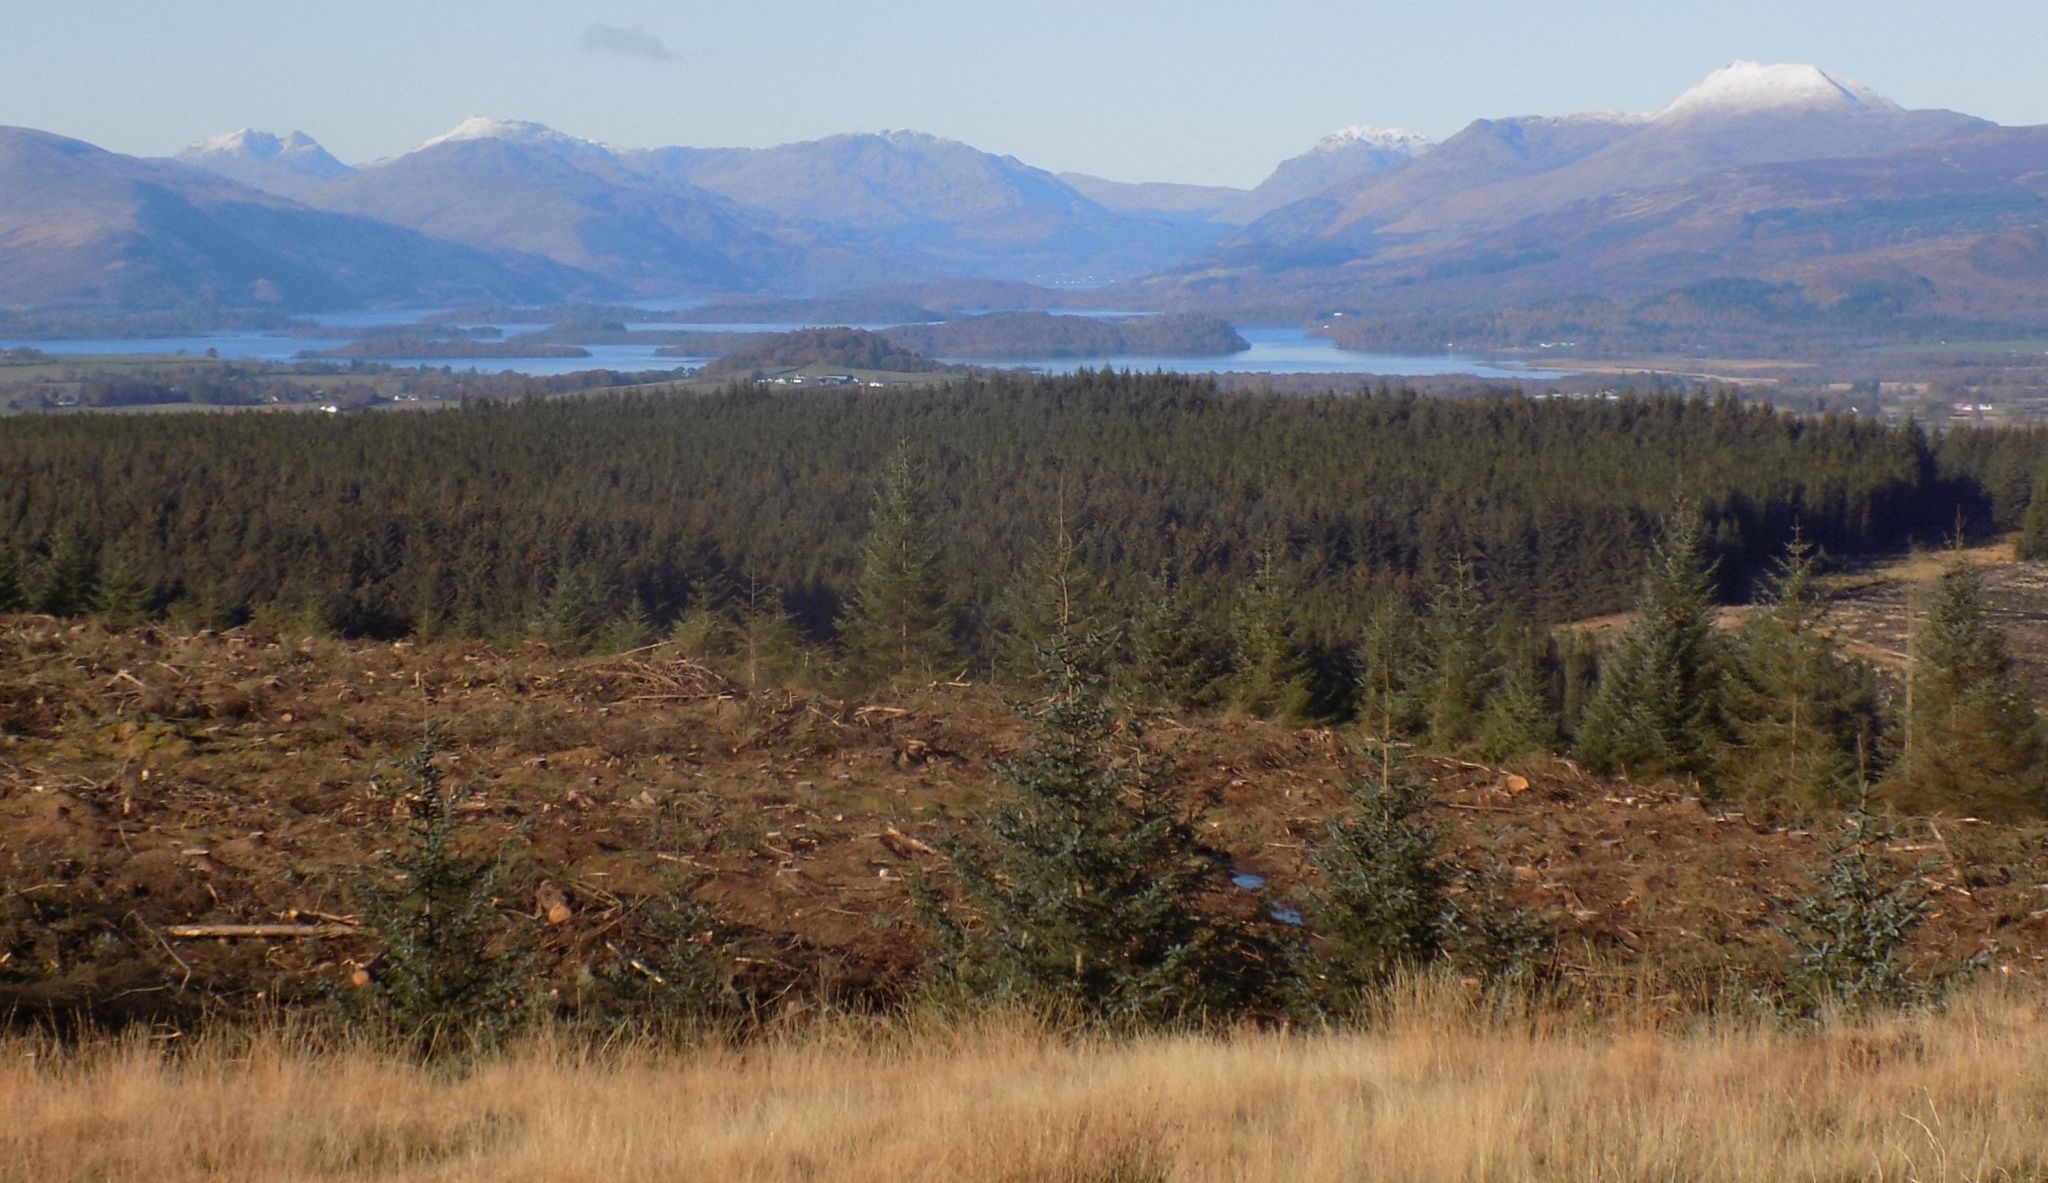 Arrochar Alps and Ben Lomond above Loch Lomond on route to the Whangie